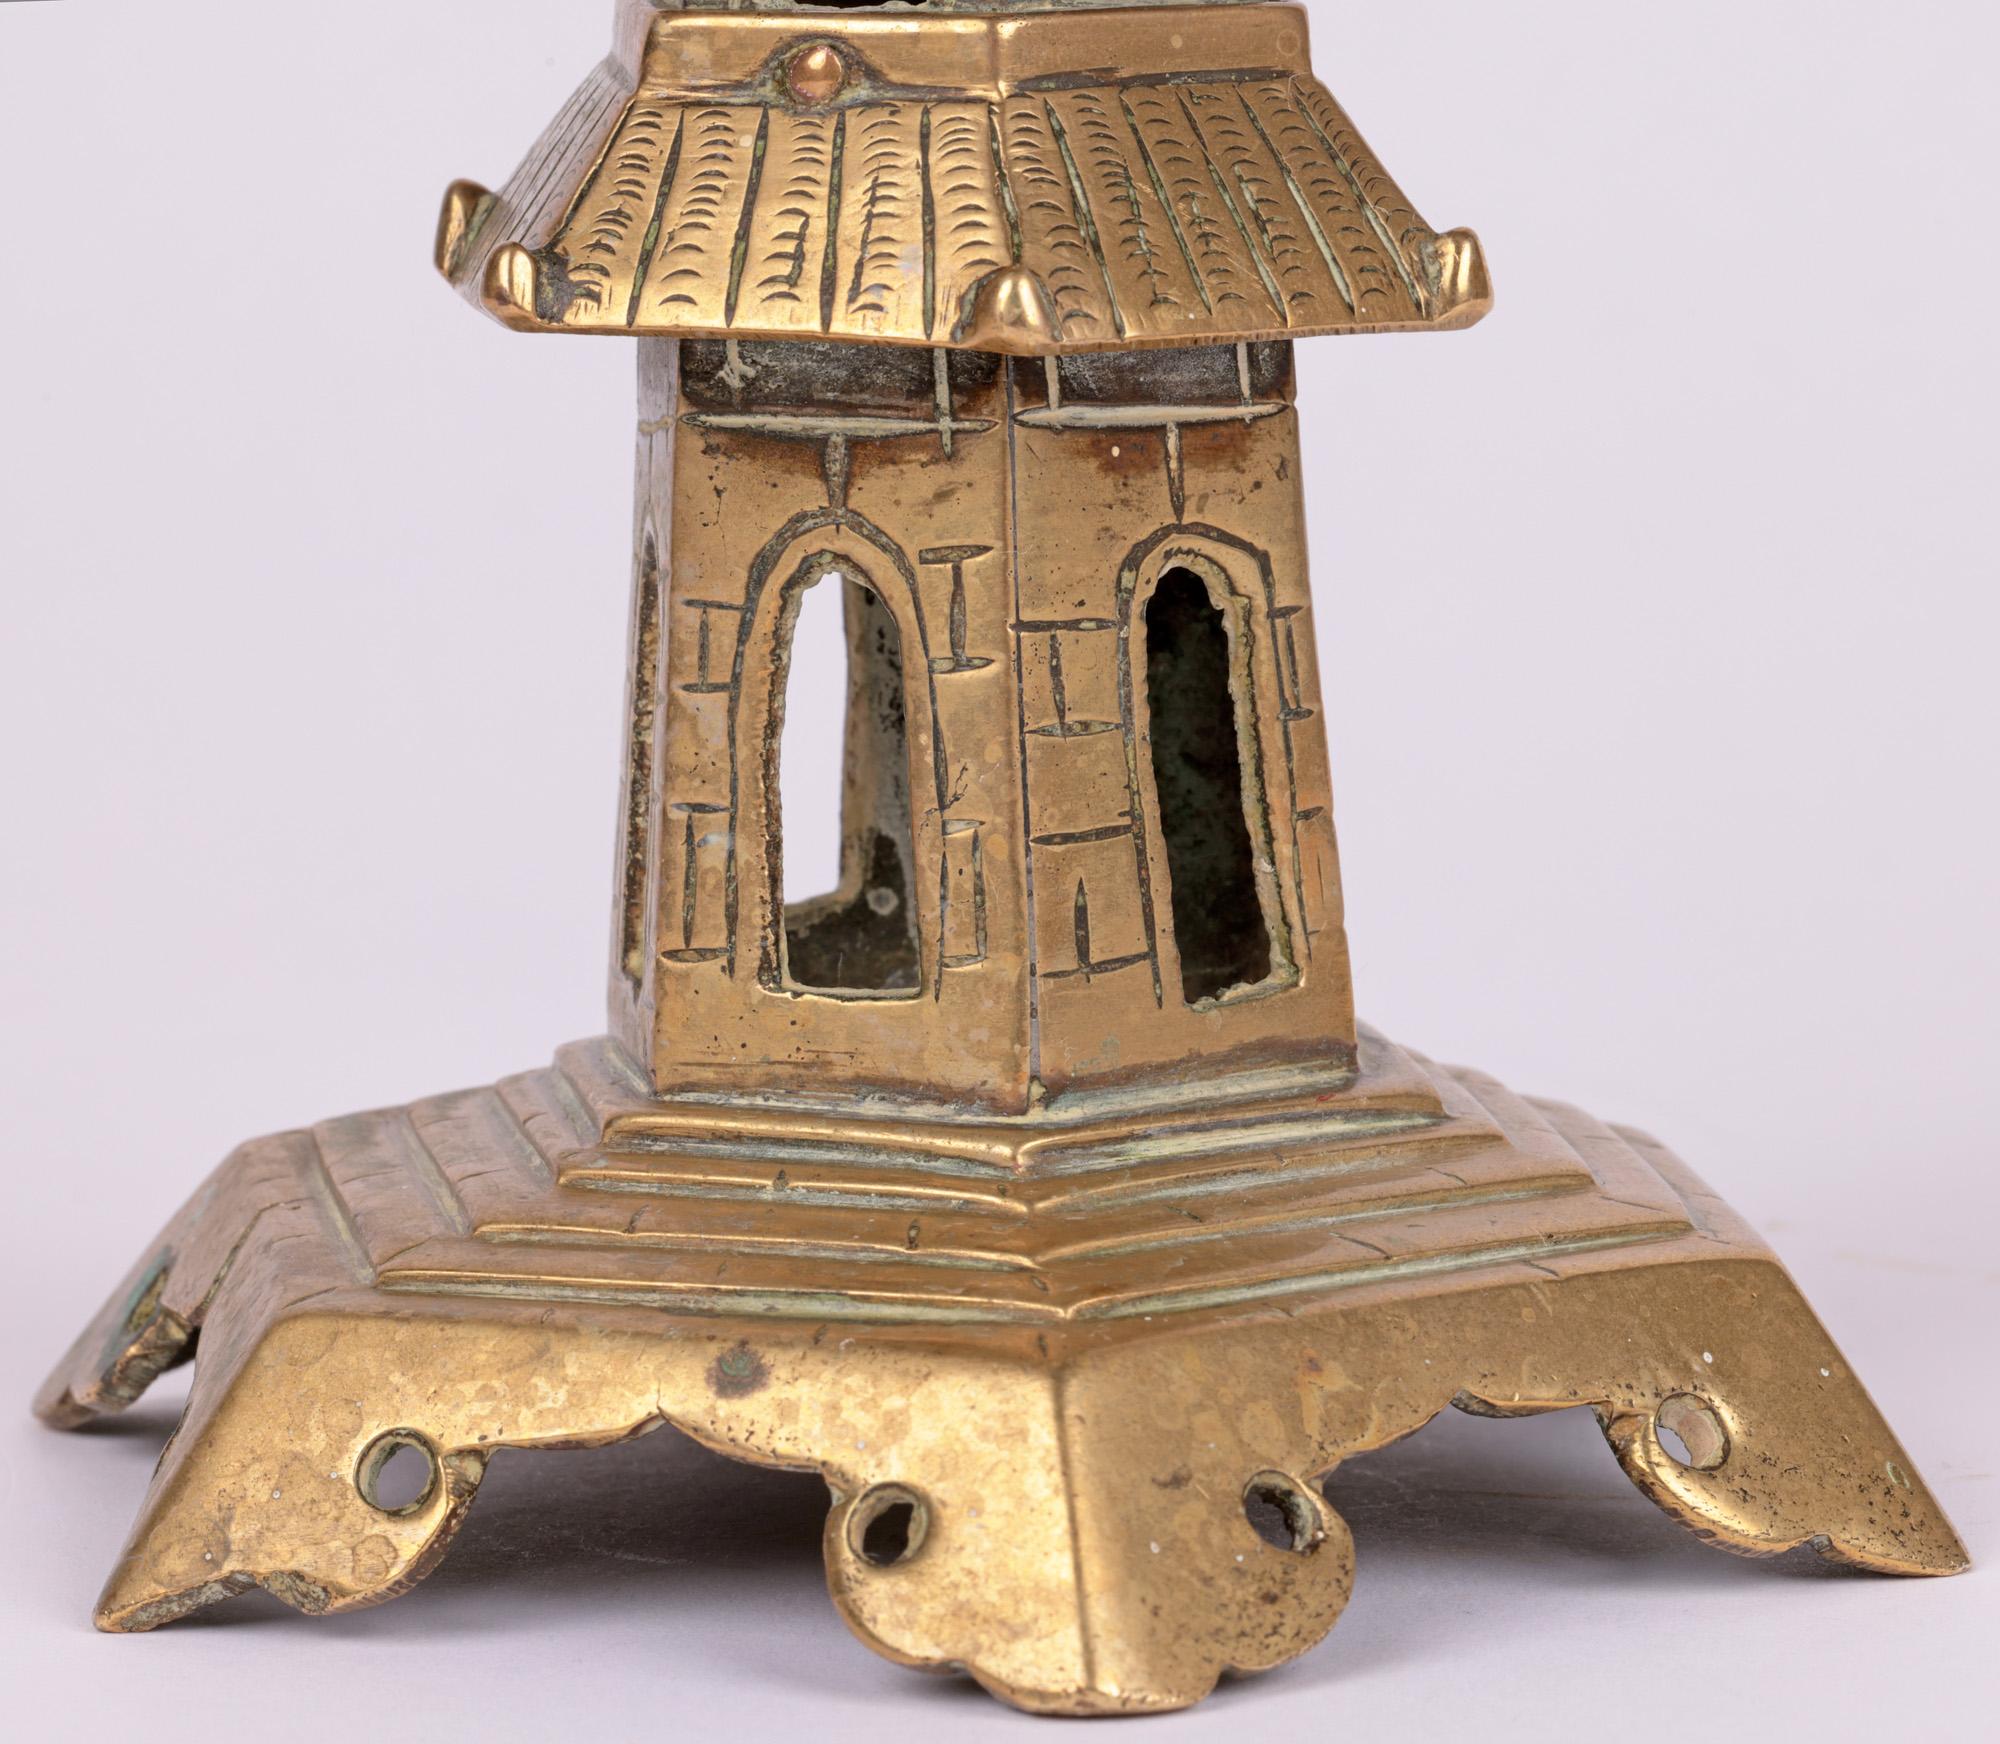 A good quality vintage, possibly antique, Chinese brass seven tier pagoda for incense dating from the early 20th century or earlier. The pagoda stands on a wide hexagonal shaped base raised on six scroll and pierced feet with steps leading up to the